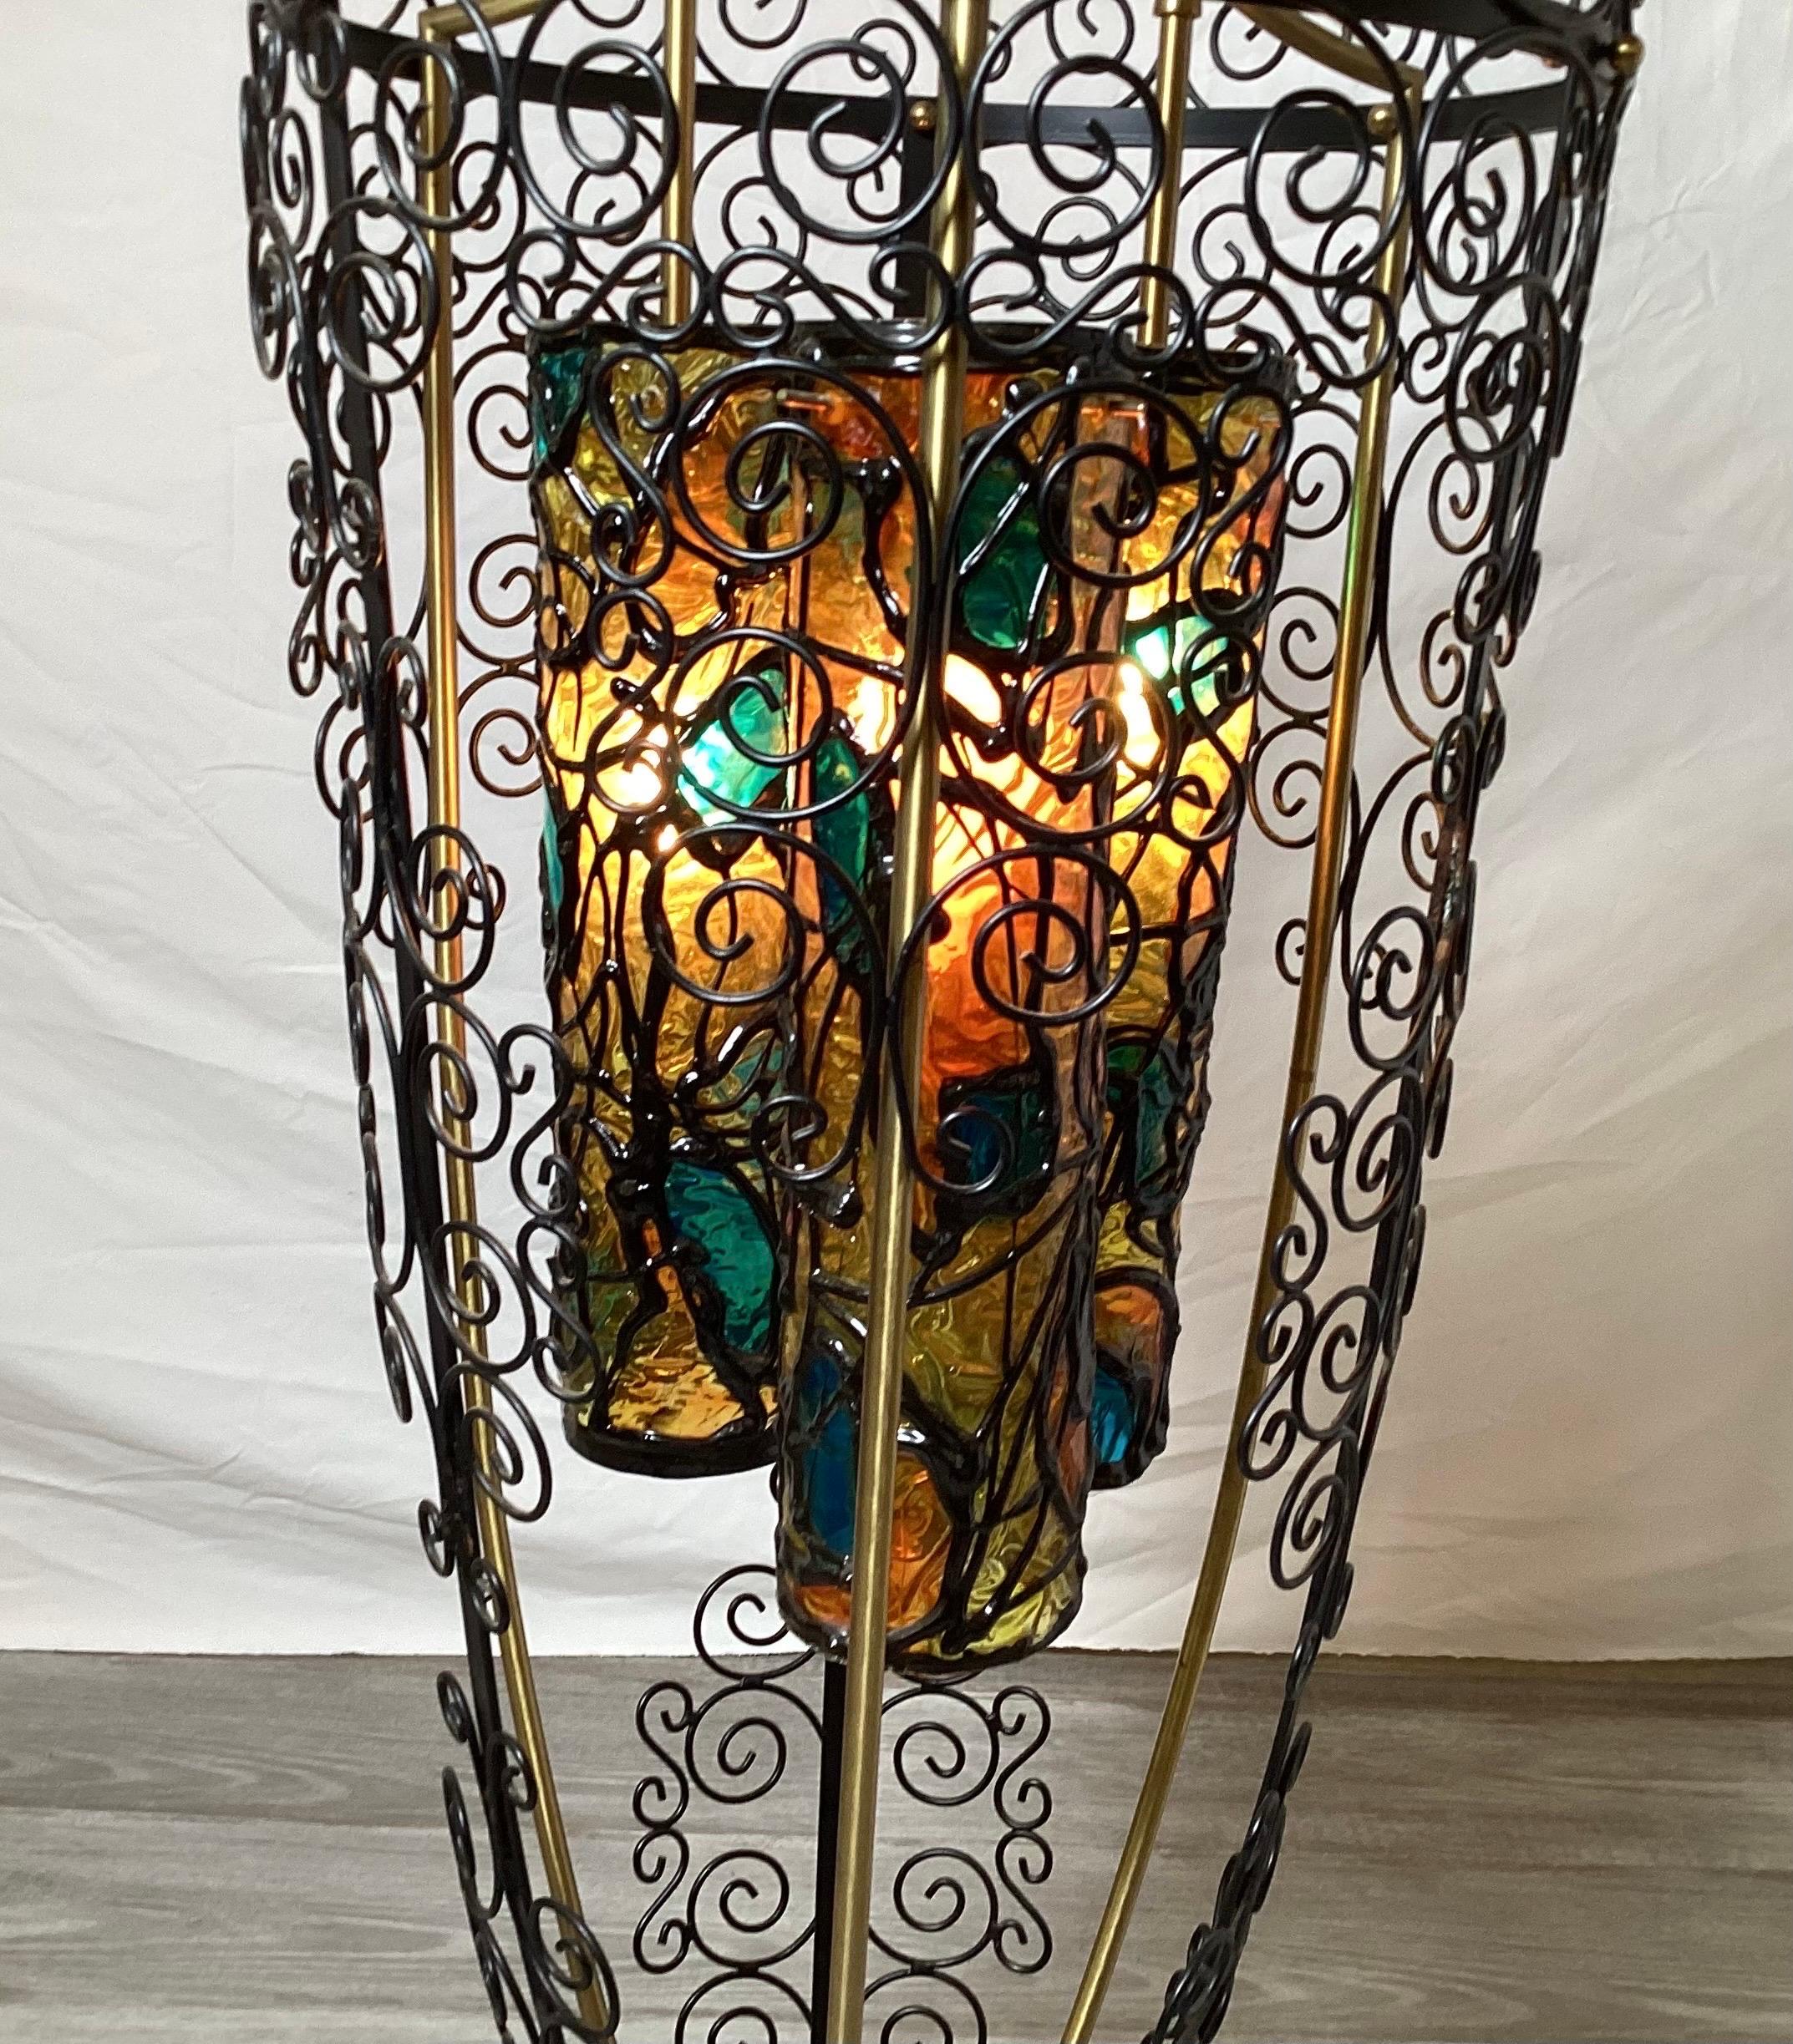 An open urn shape table lamp with three plastic stained glass shades. The iron bird gage urn form with burnished brass supports, 10 inch diameter at the bottom, 14.5 dimeter at the top, 45 inches tall. Whimsical mid century design.